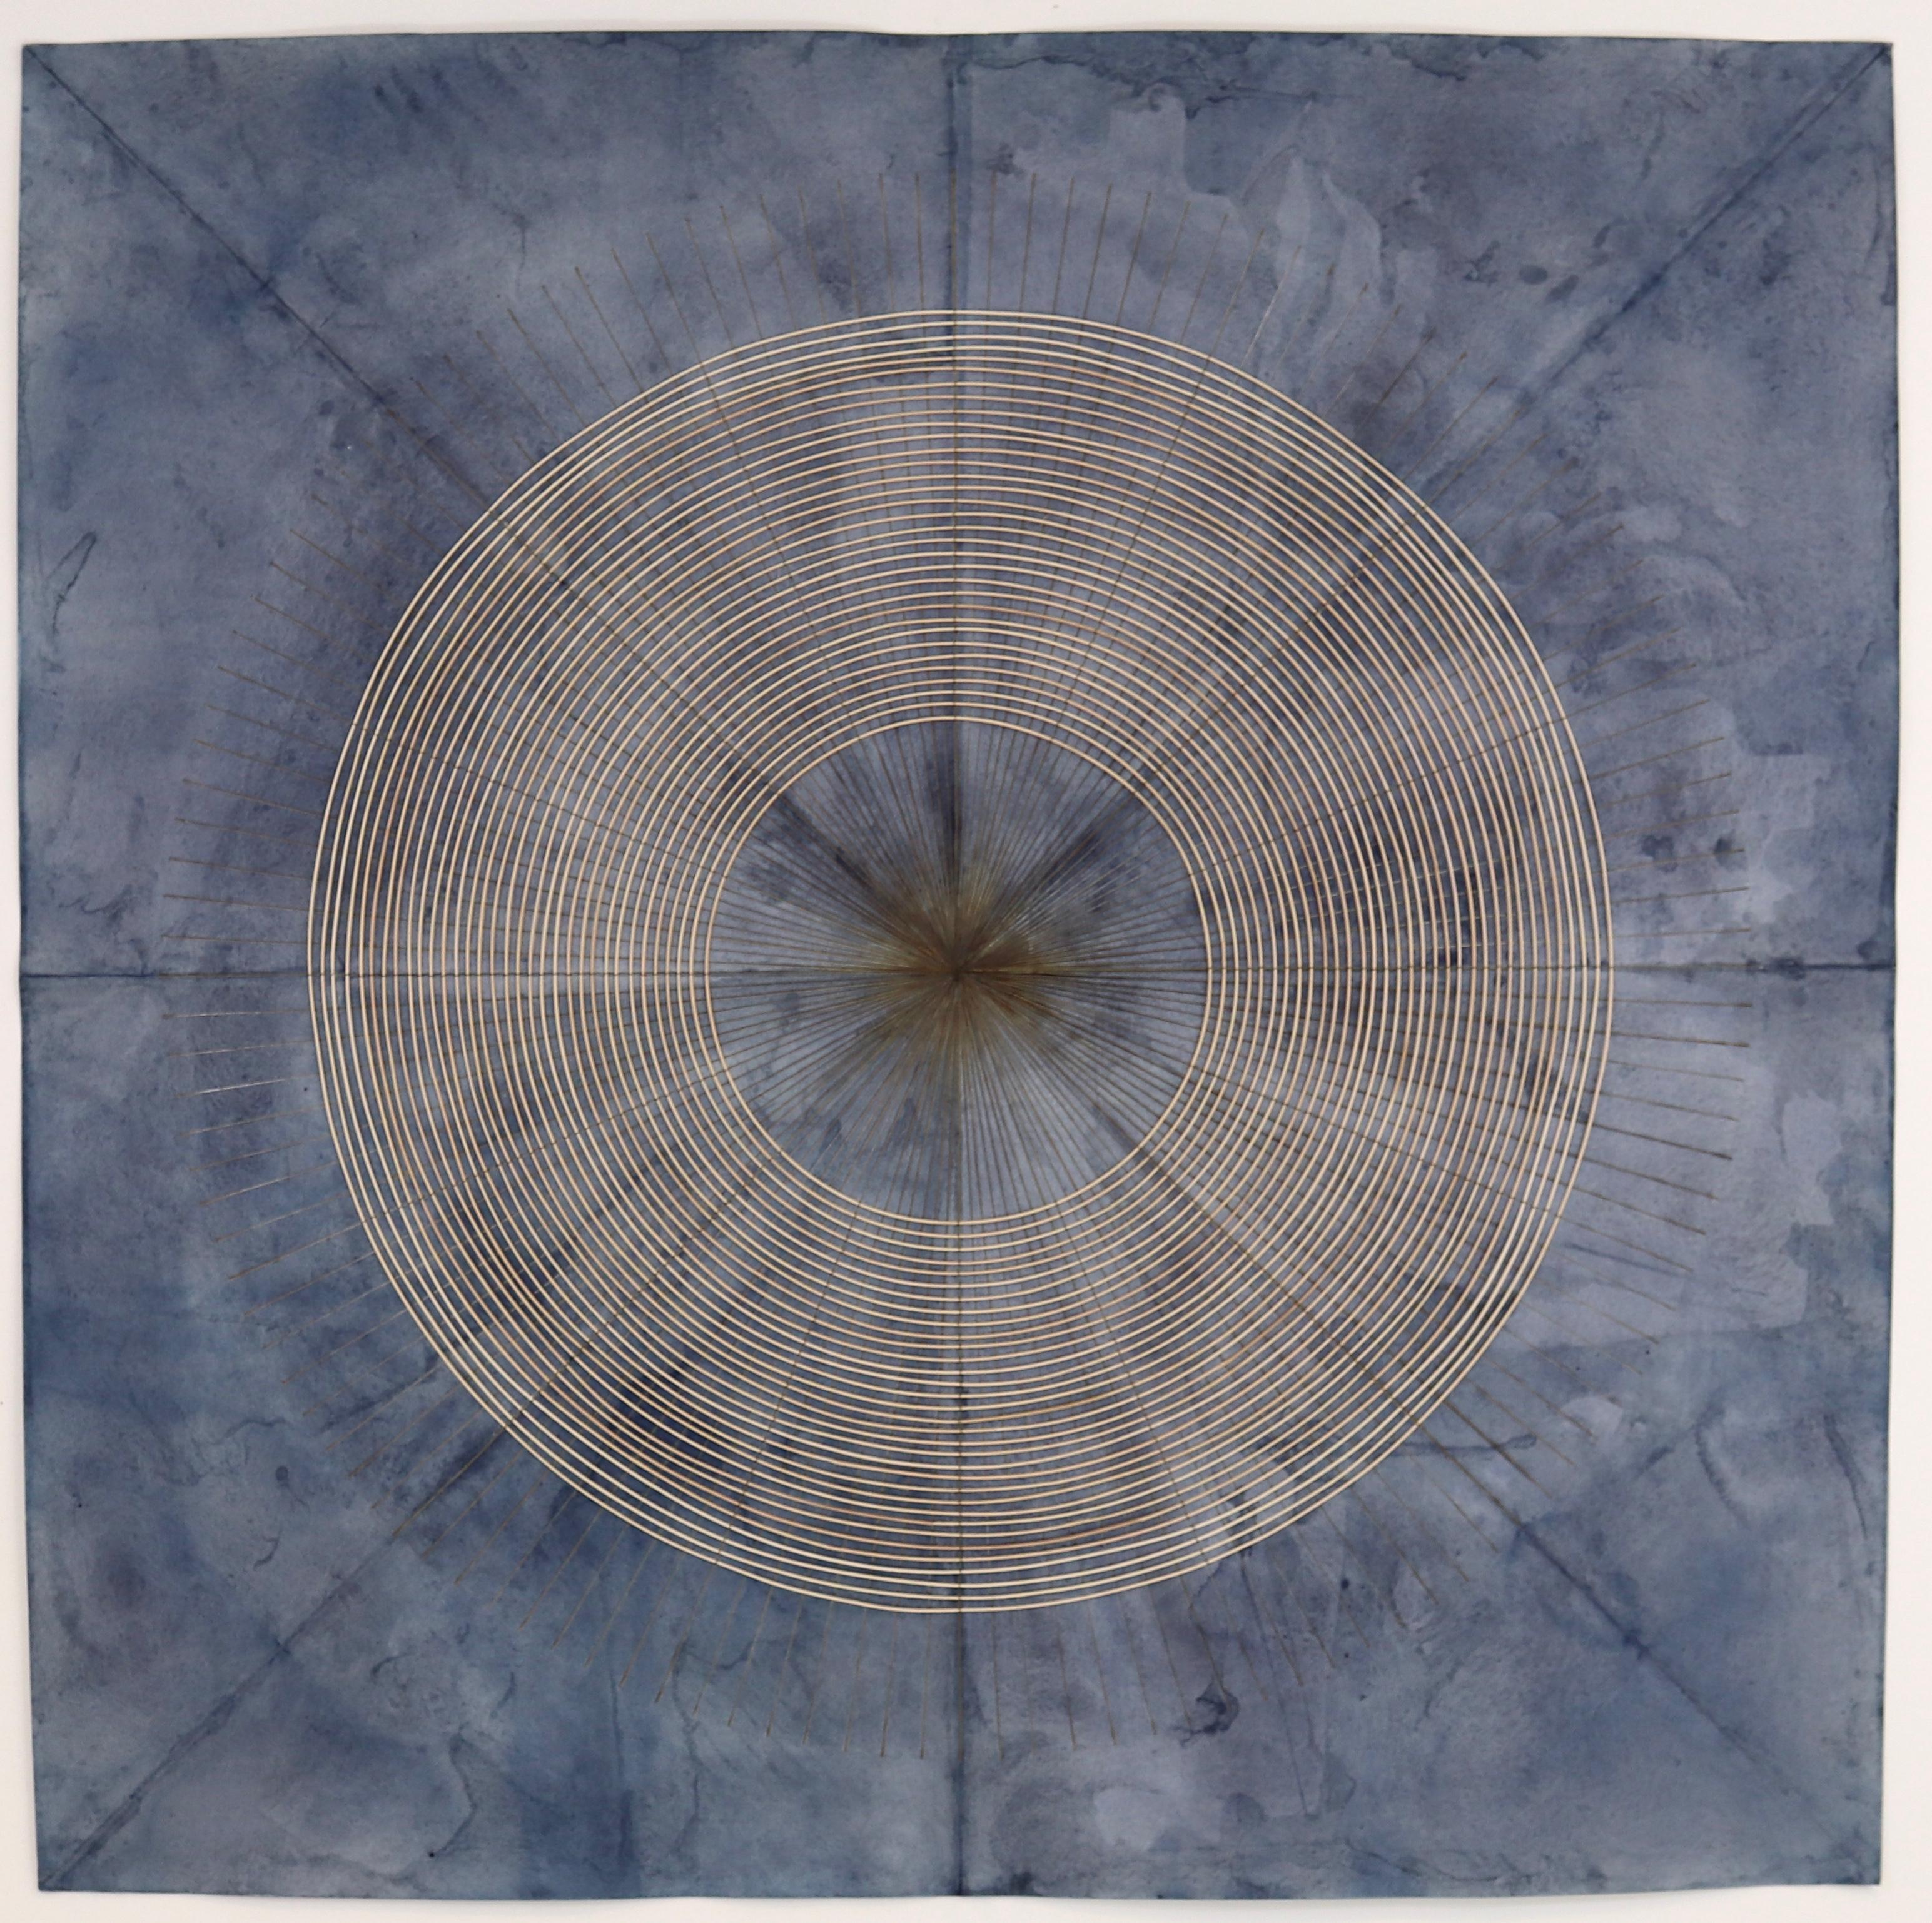 Concentric Alignment - Mixed Media Art by Katrine Hildebrandt